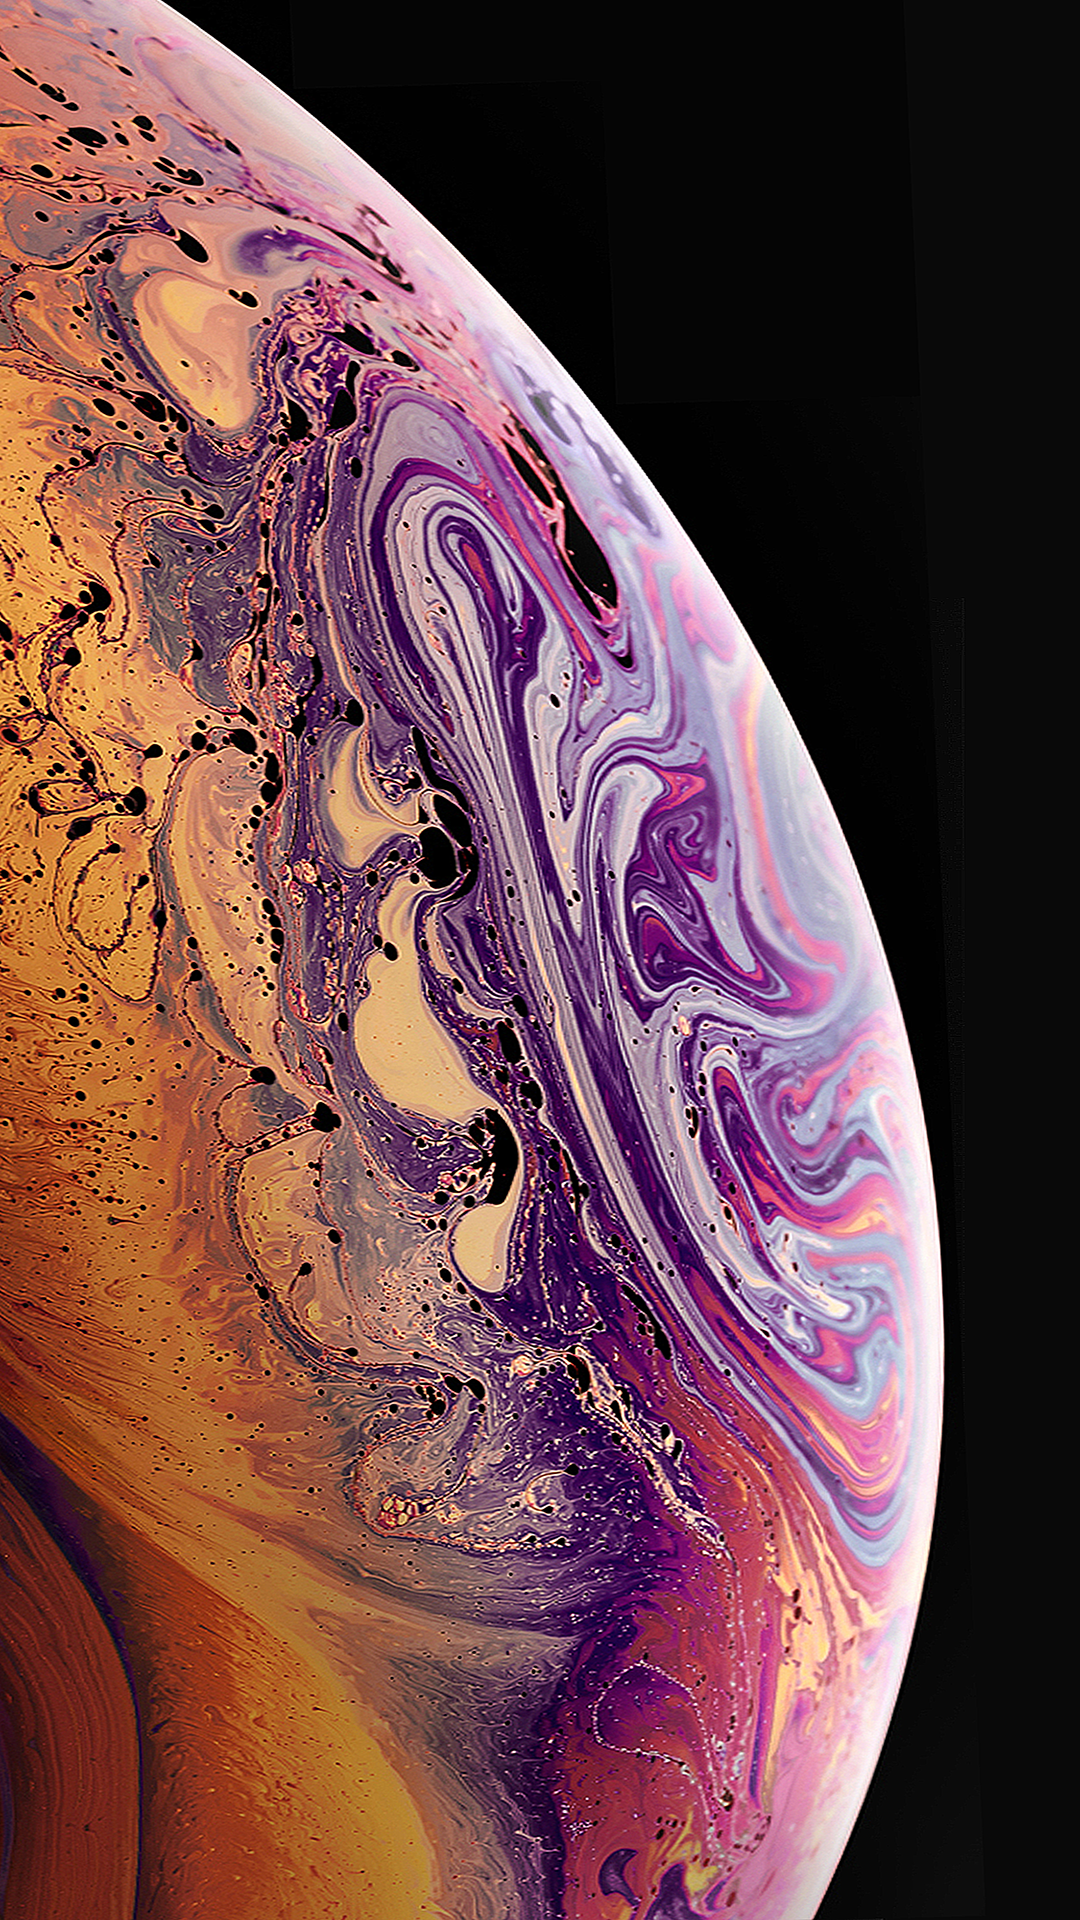 iOS 12 Wallpapers for iPhone Xs Xs Max and Xr By ispazio and 1080x1920